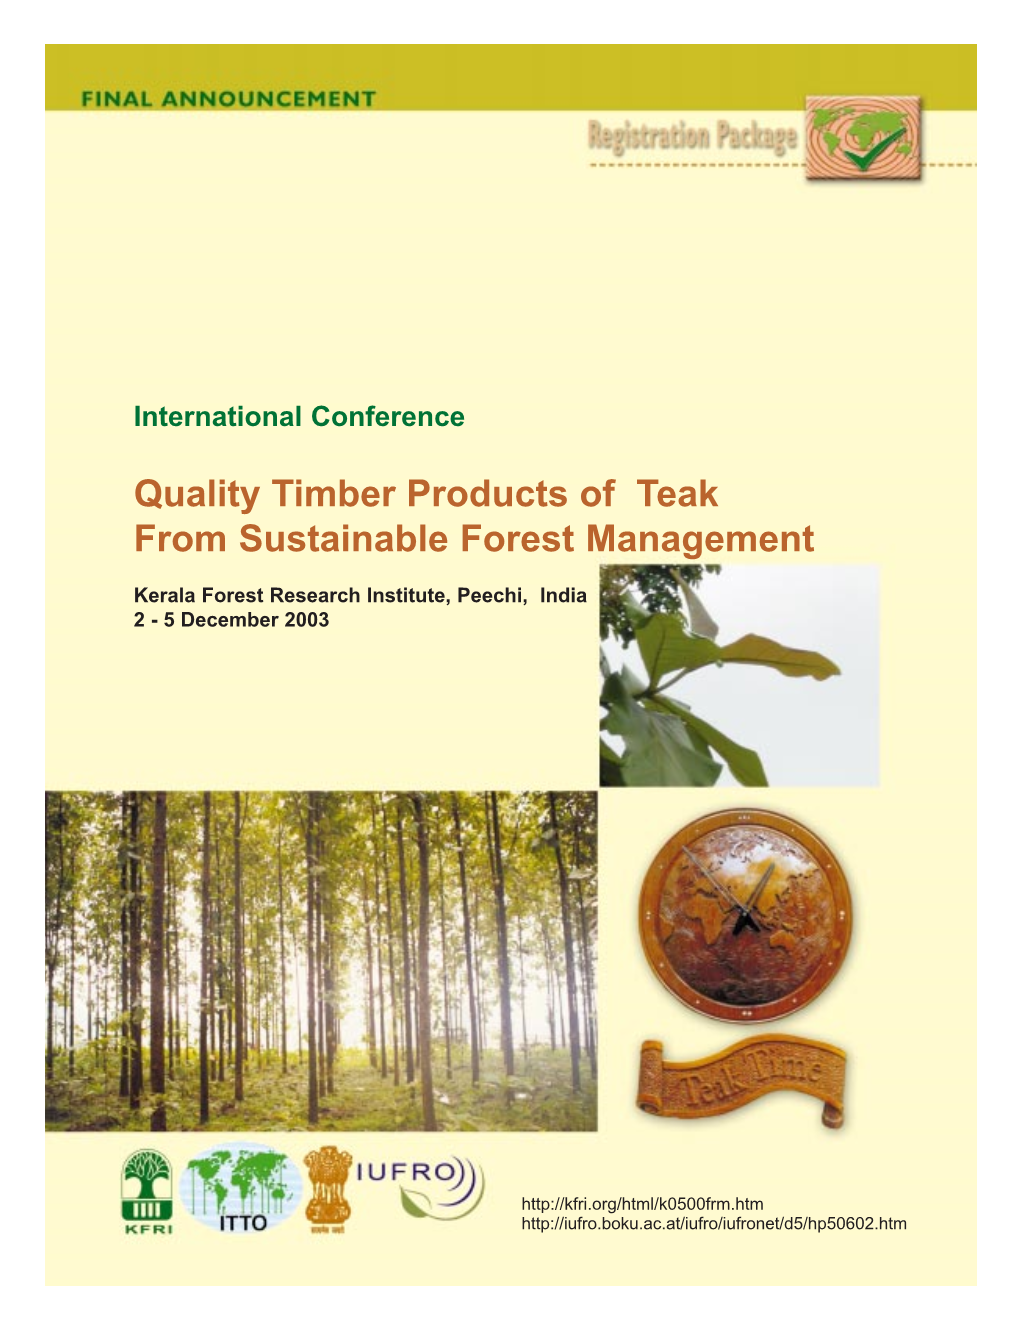 Quality Timber Products of Teak from Sustainable Forest Management